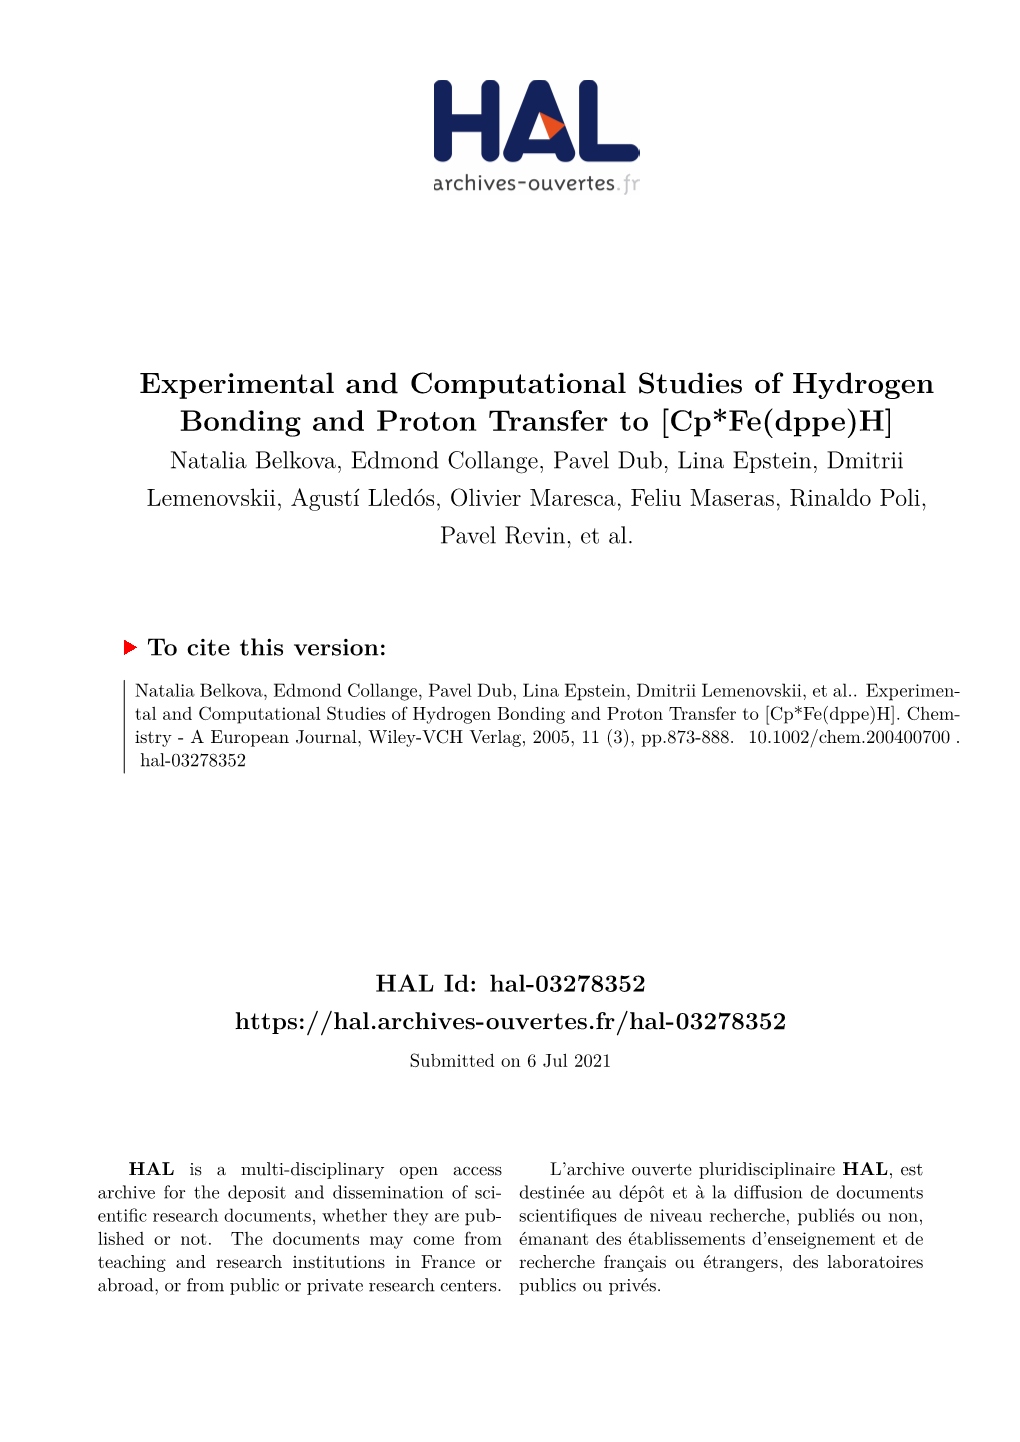 Experimental and Computational Studies of Hydrogen Bonding And